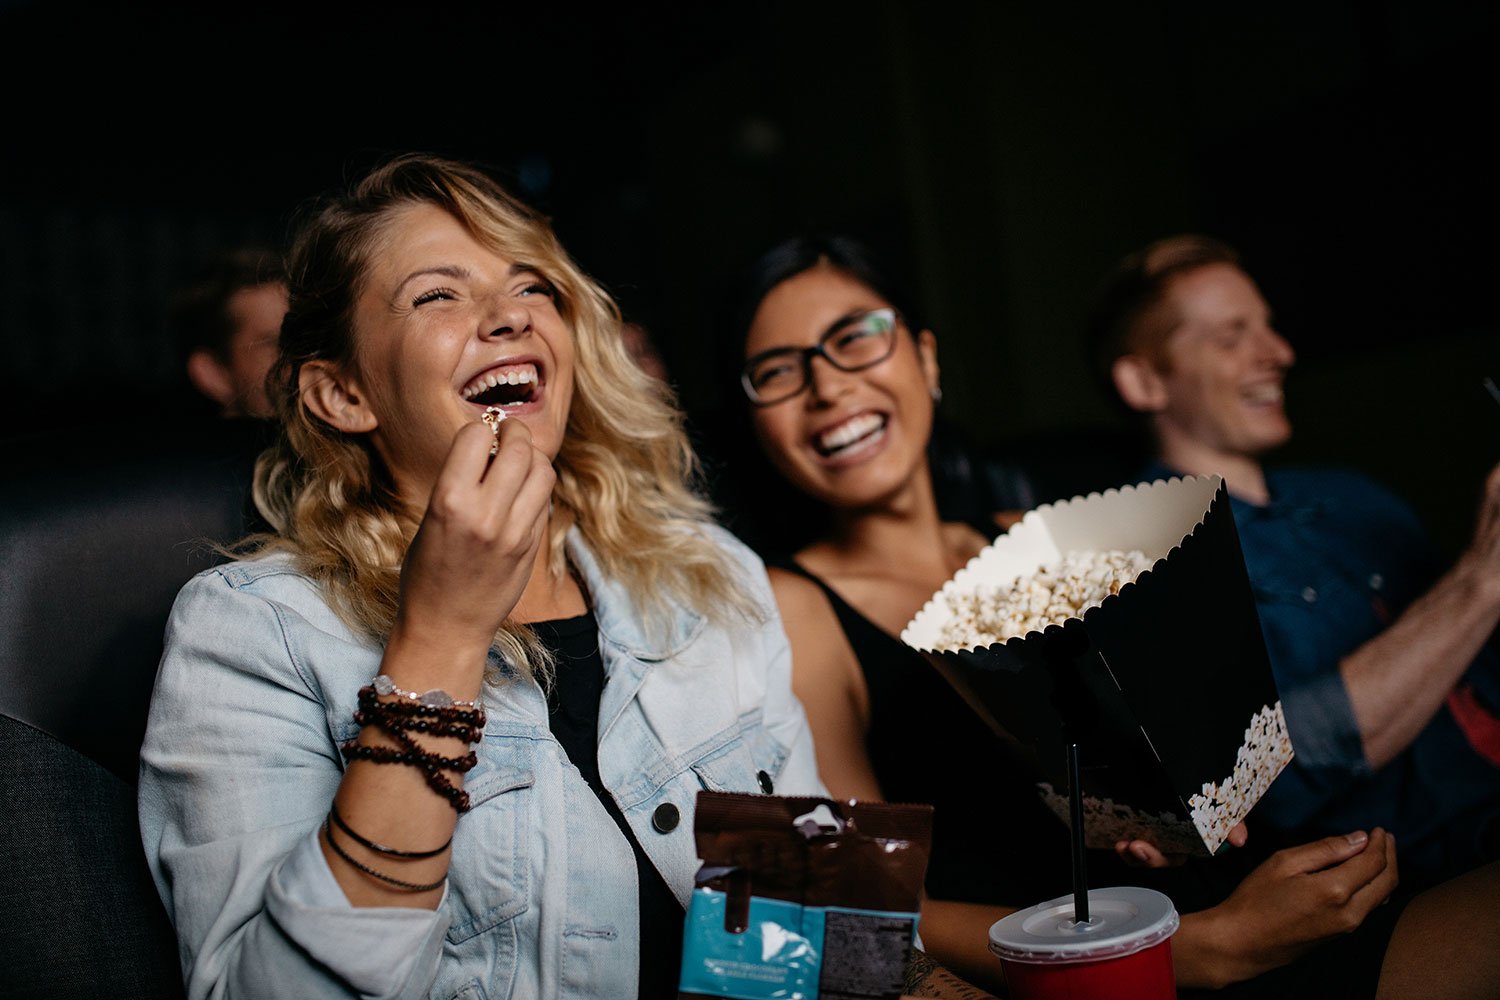 p35 Still sneaking your own snacks into the cinema? It’s time to think again